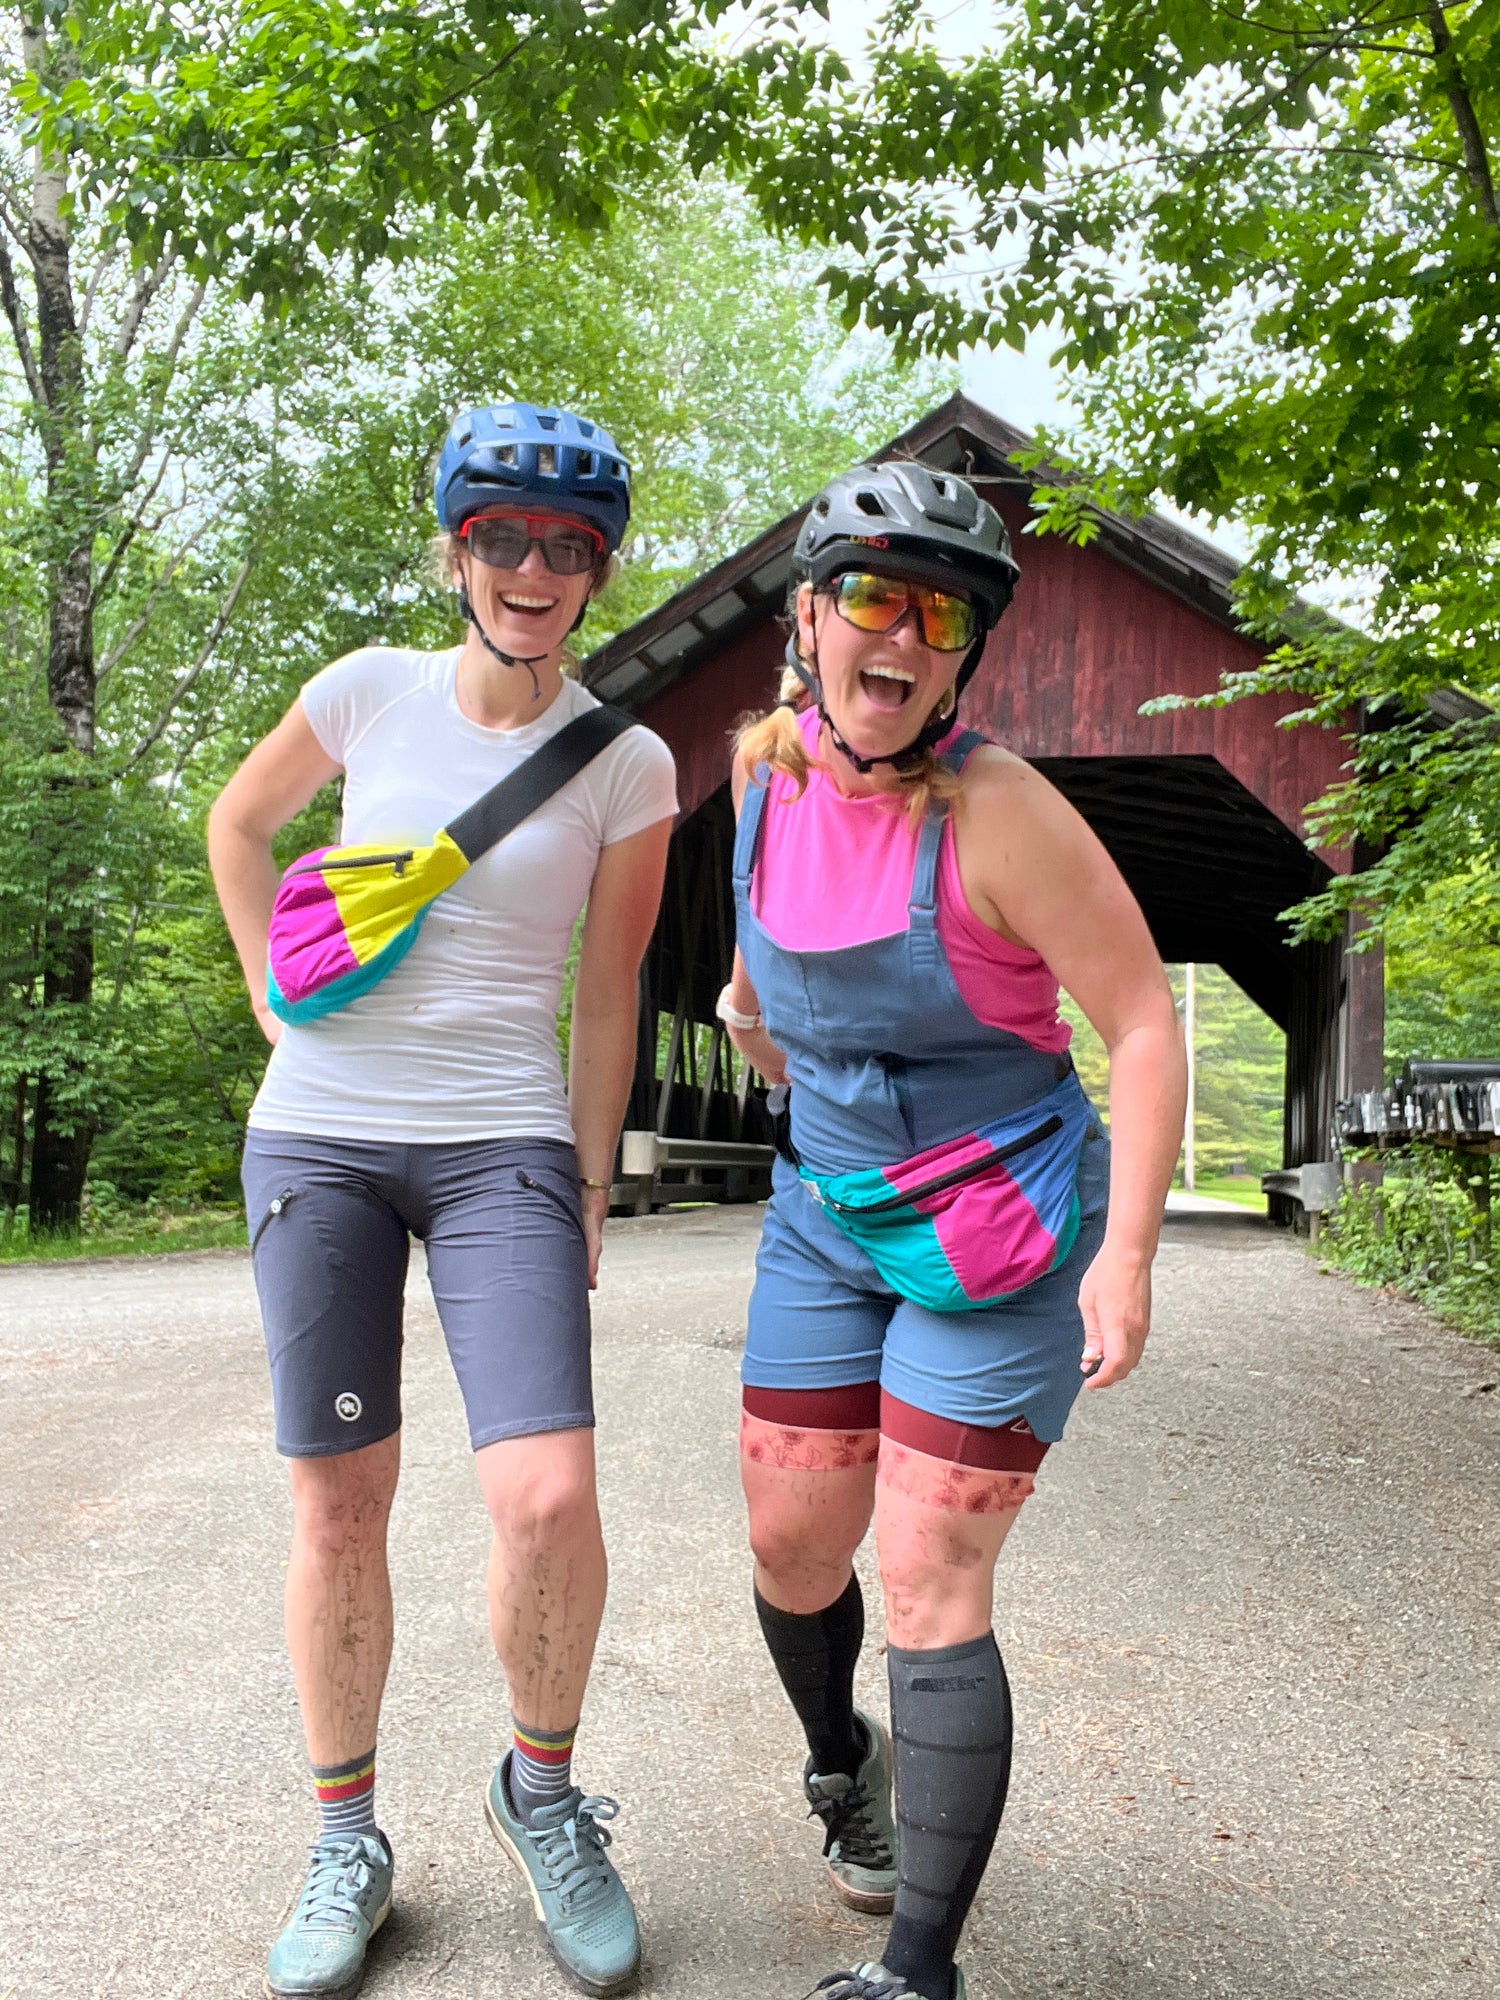 Two women laughing in mountain biking clothes and wearing two colorful recycled fanny packs